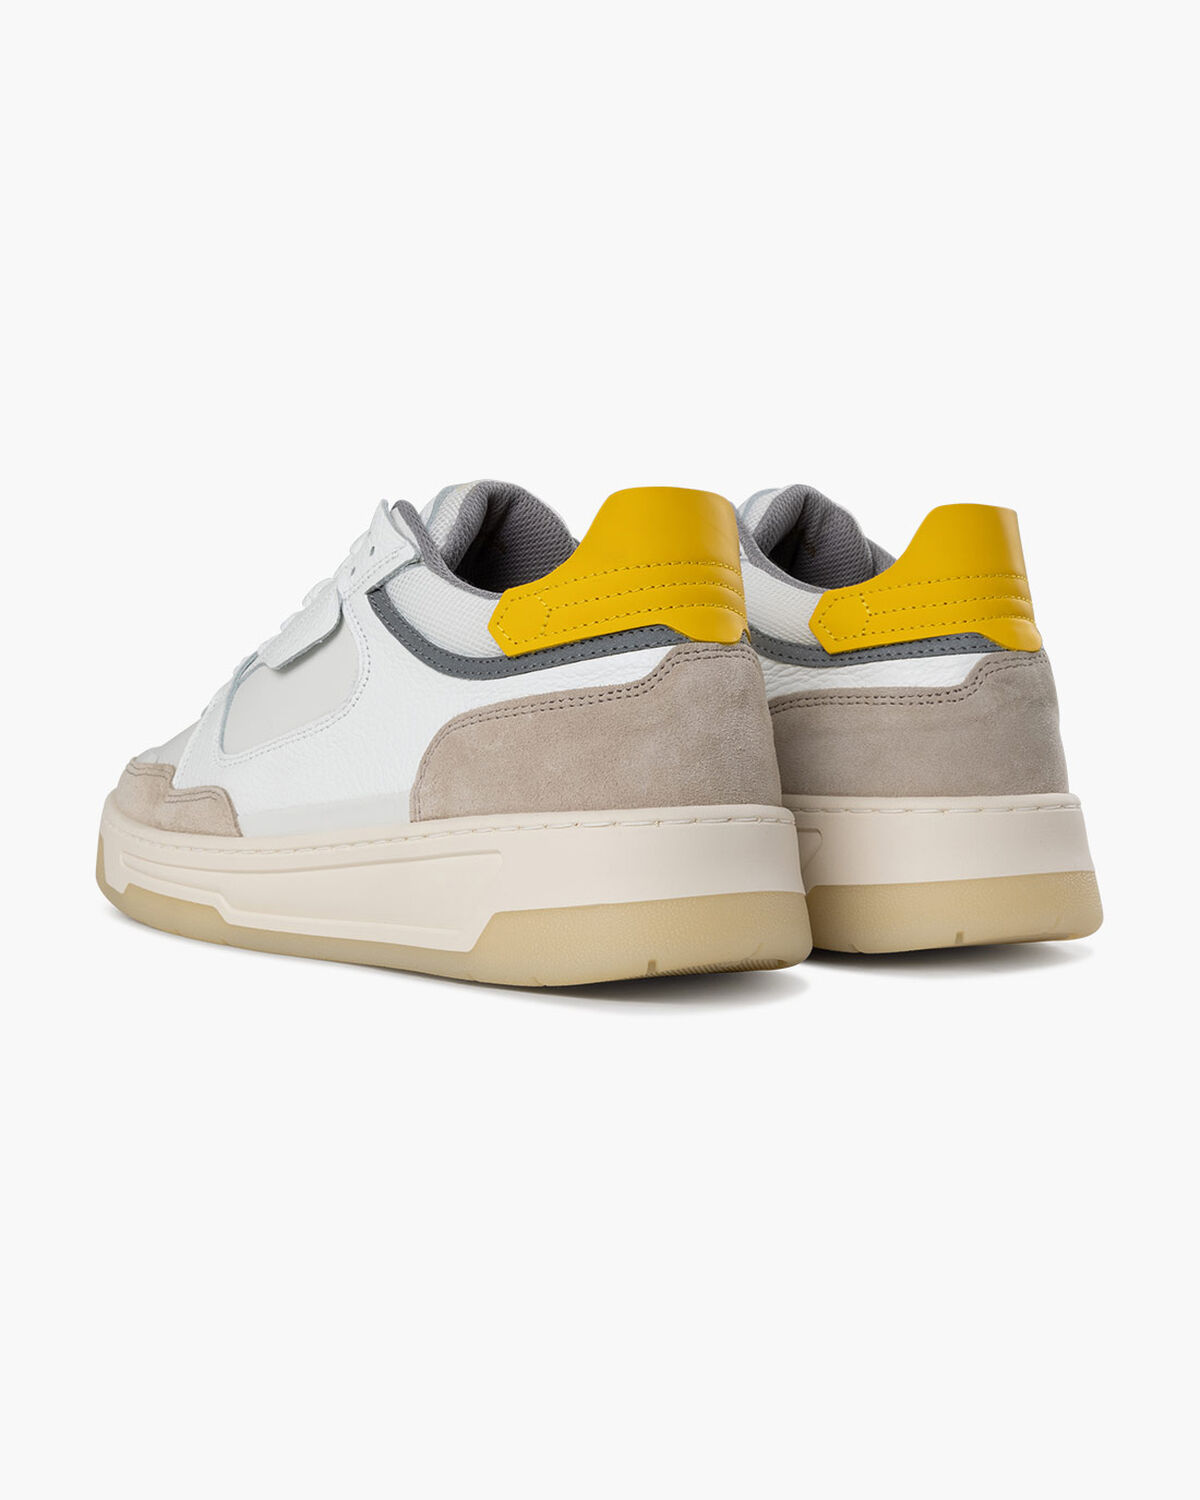 Nemes Mid - Soft Nappa/Suede, White/Yellow, hi-res